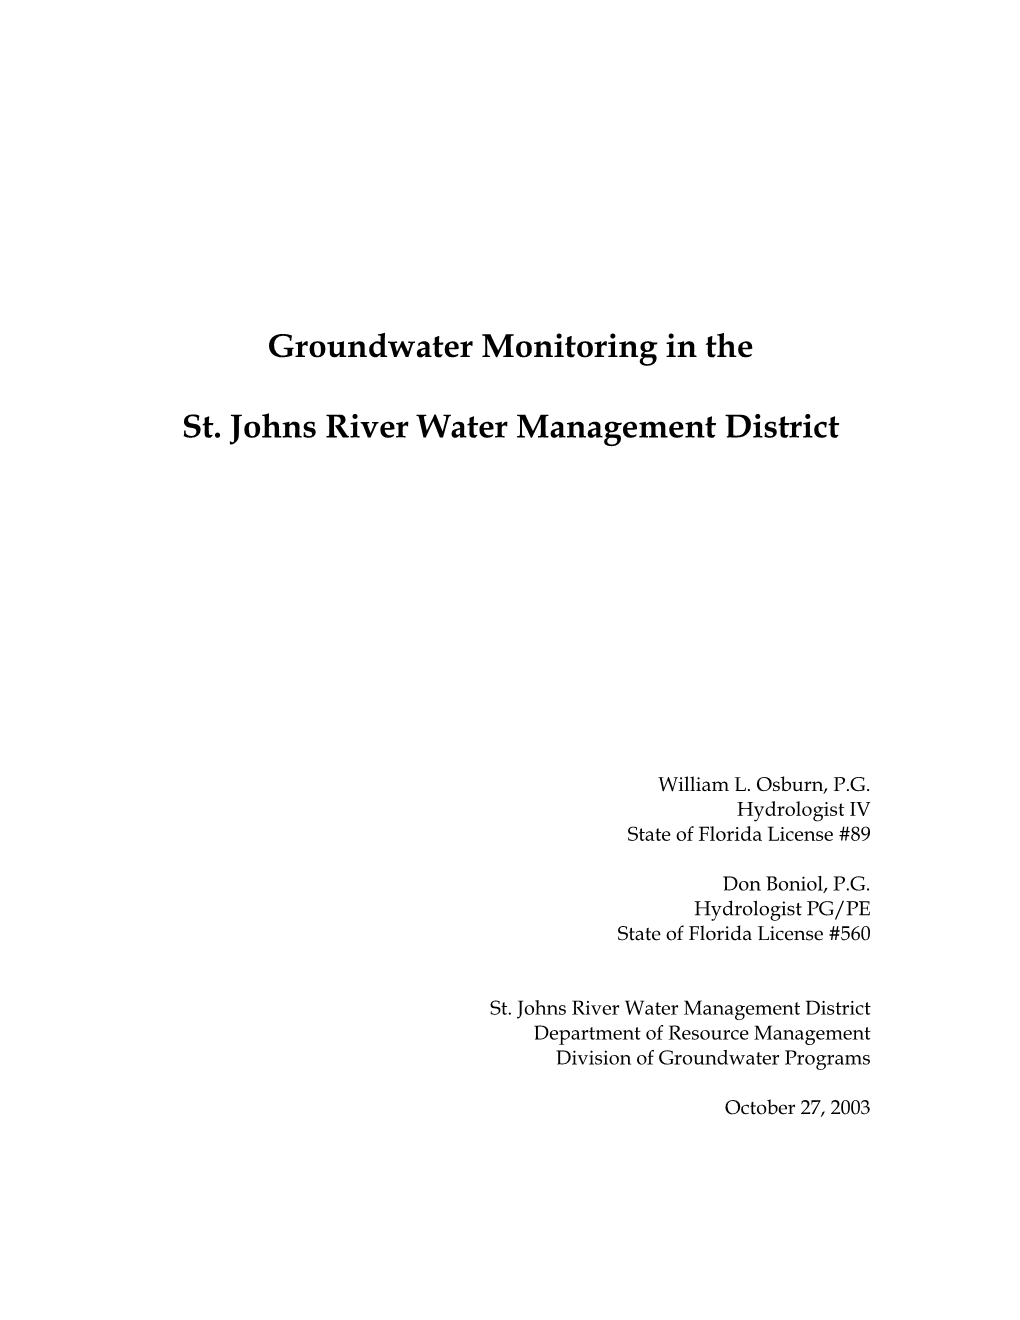 Groundwater Monitoring in the St. Johns River Water Management